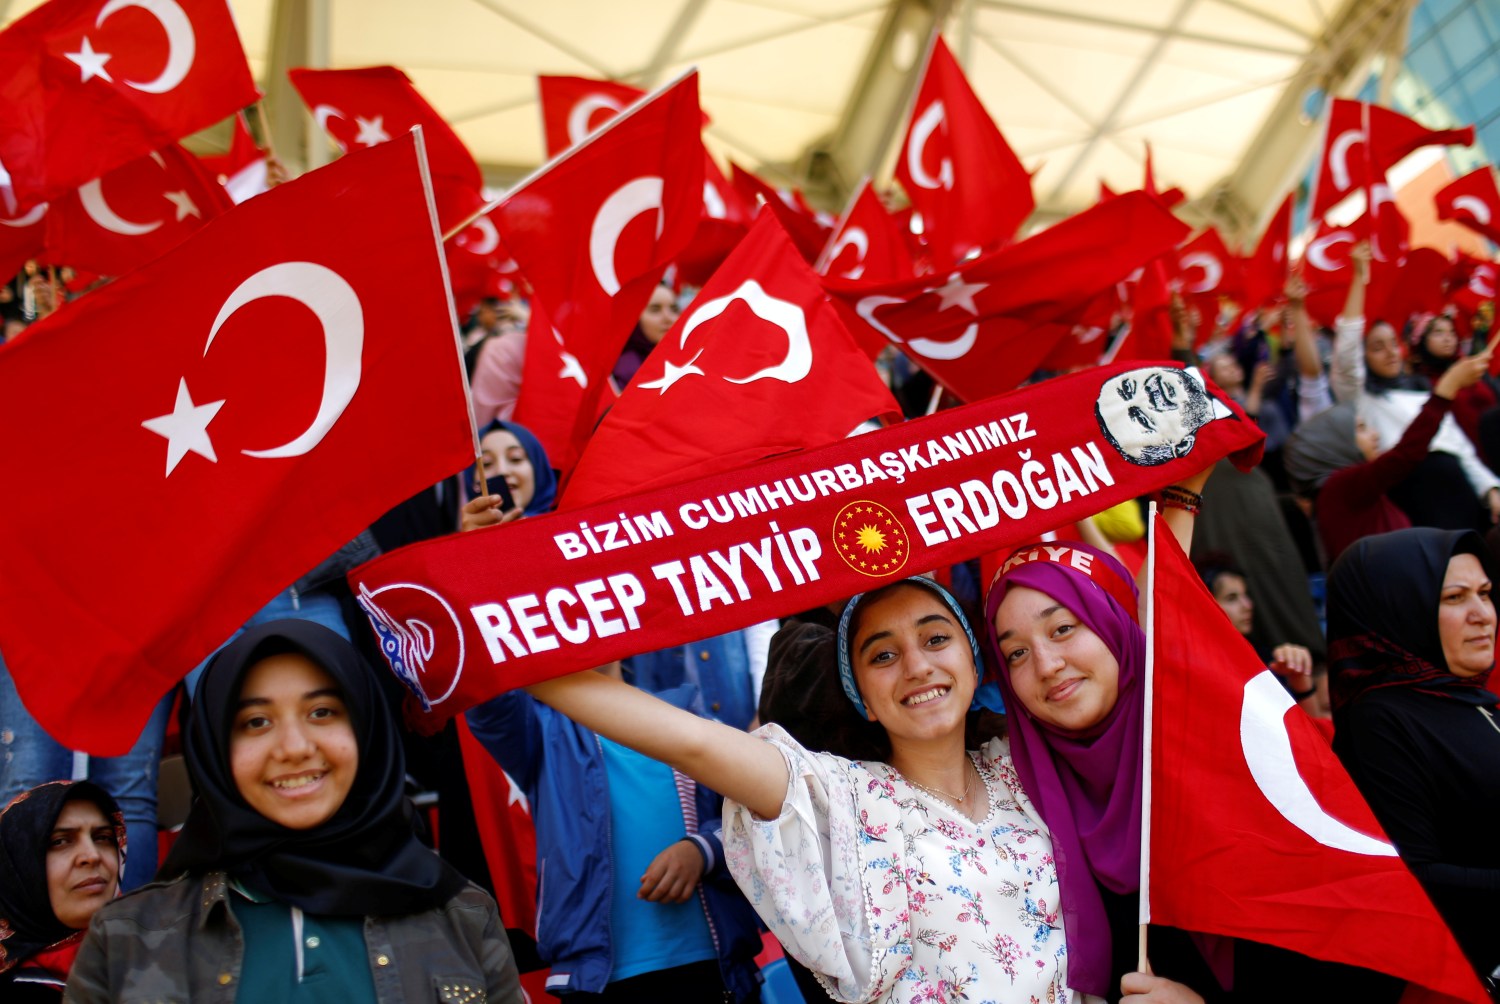 Imam Hatip religious school students wave national flags as they wait for arrival of Turkish President Tayyip Erdogan during a graduation ceremony in Istanbul, Turkey, May 26, 2017. REUTERS/Murad Sezer - RTX37SQ9